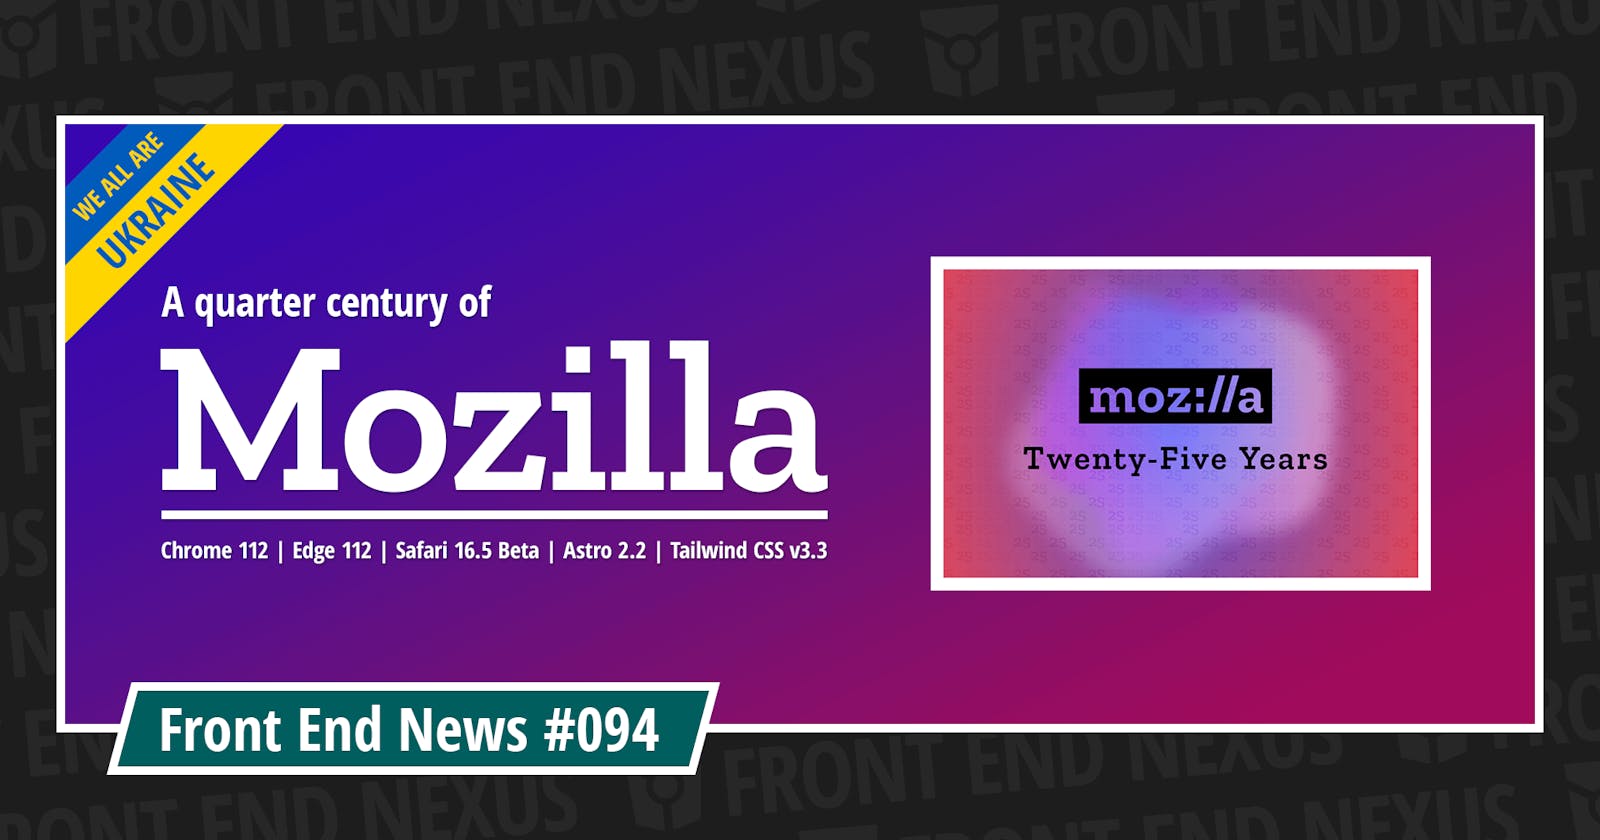 25 years of Mozilla, Chrome 112, Edge 112, Safari 16.5 Beta, Astro 2.2, Tailwind CSS v3.3, and more | Front End News #094